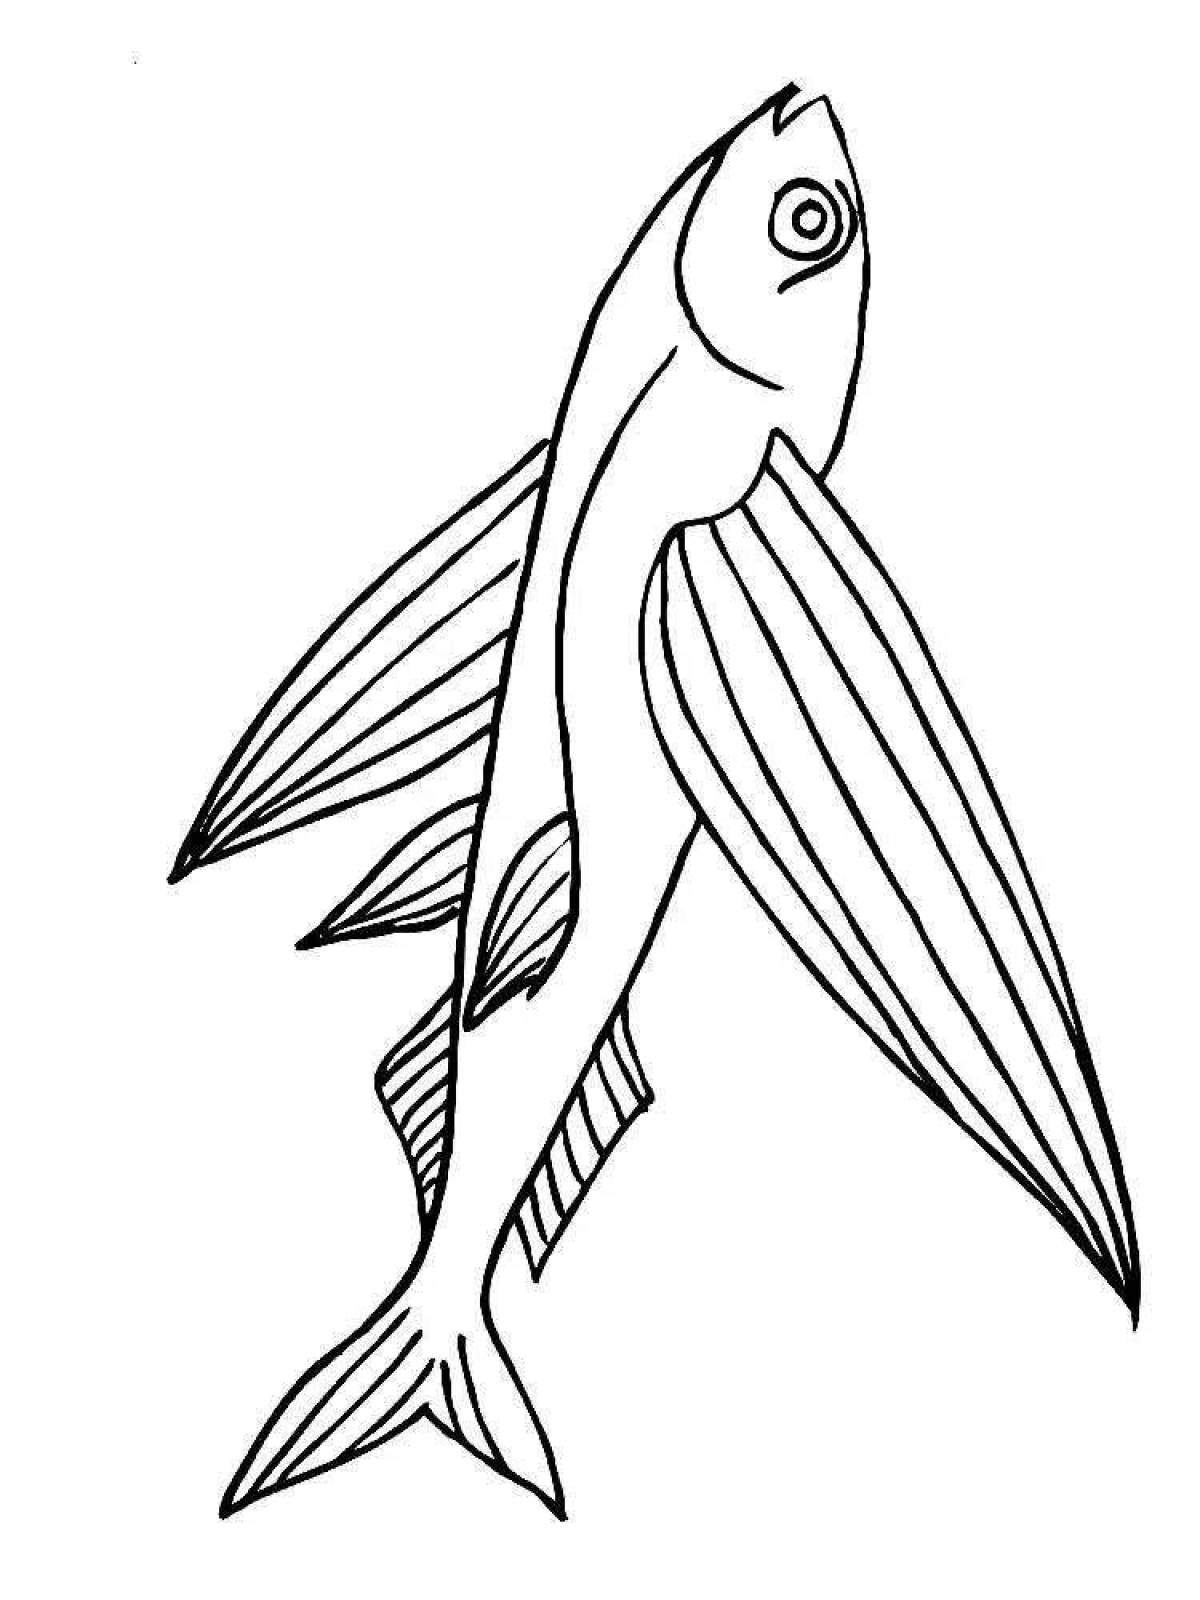 Coloring book dazzling flying fish